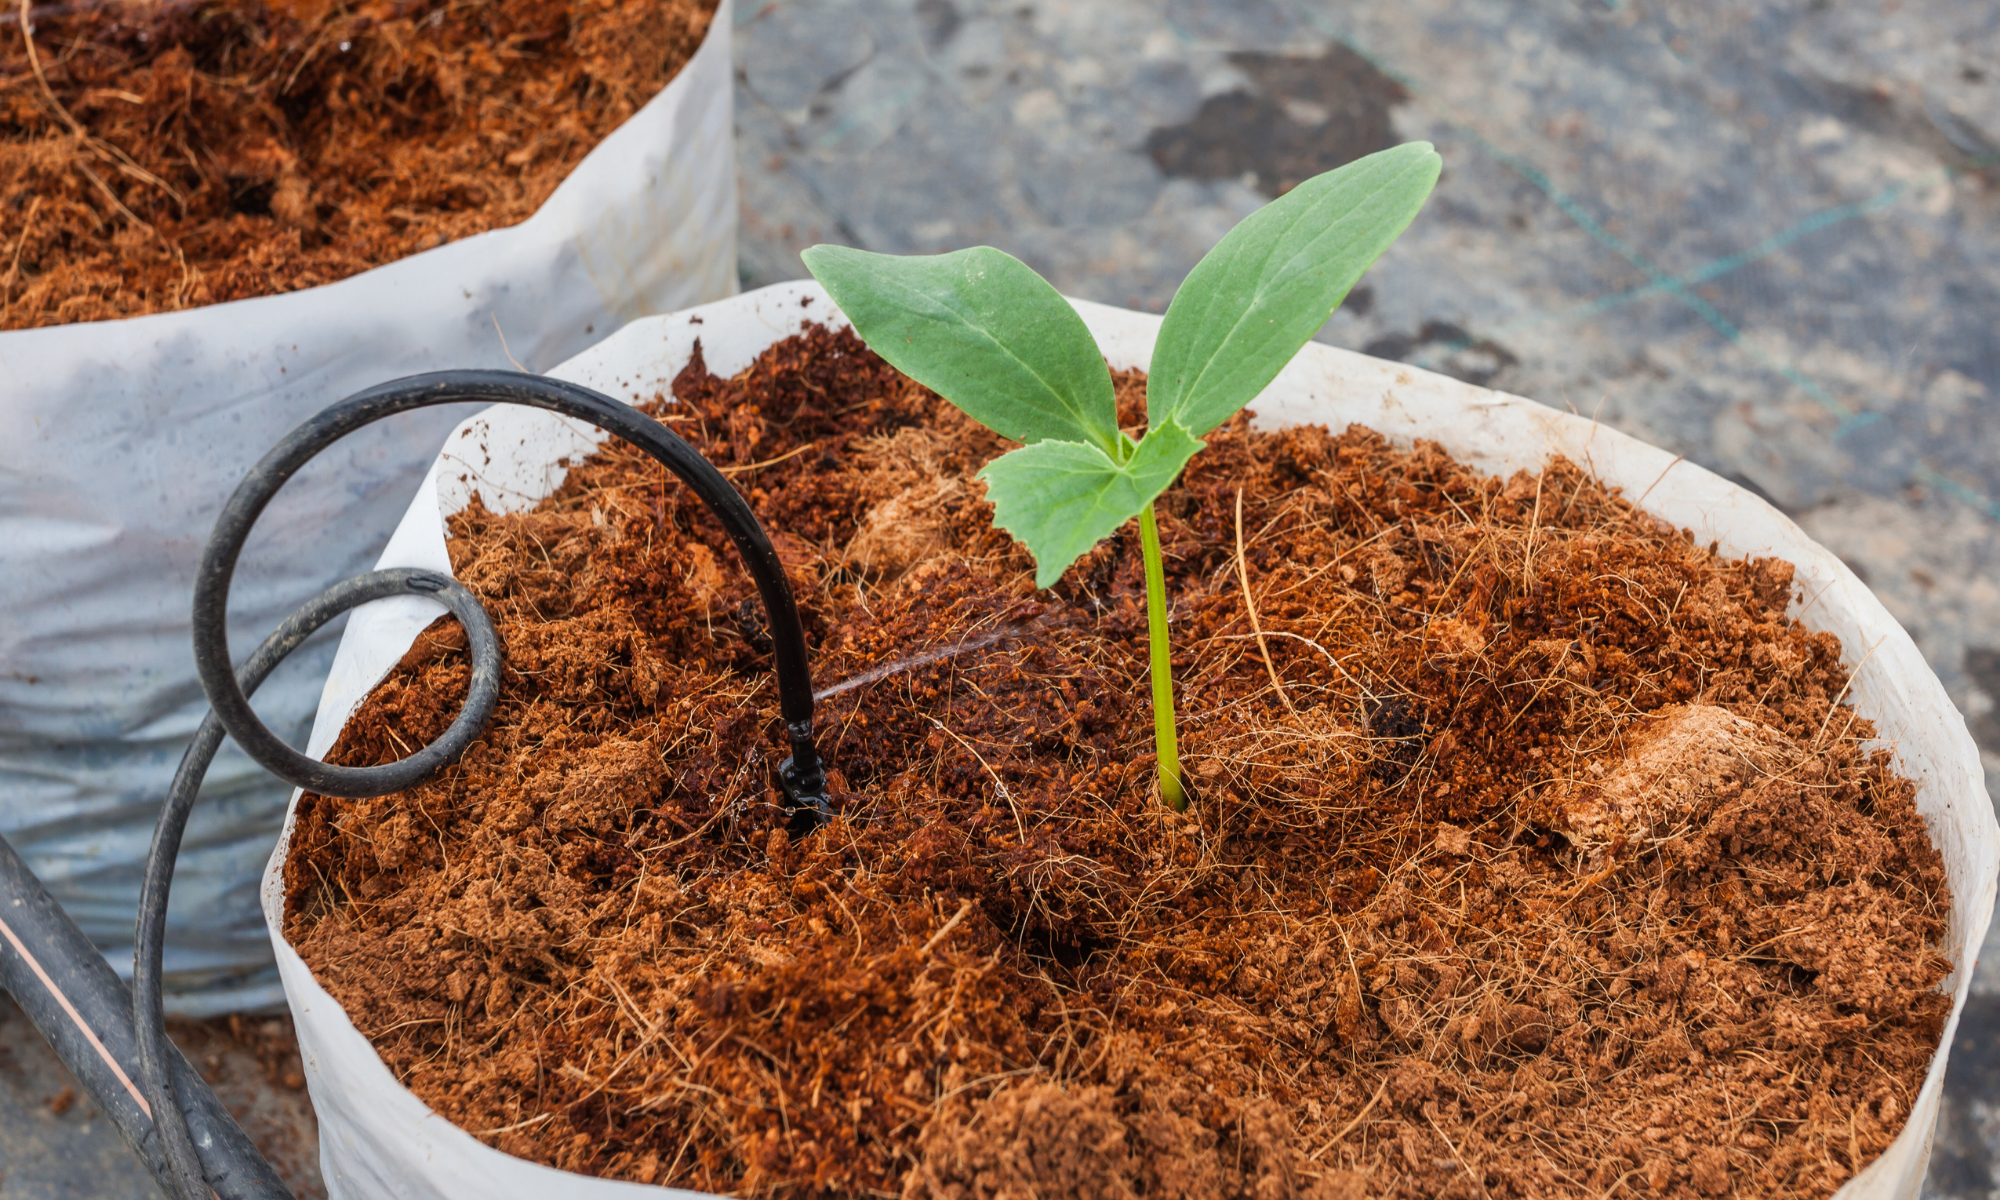 How to Use Coco Peat in Hydroponics